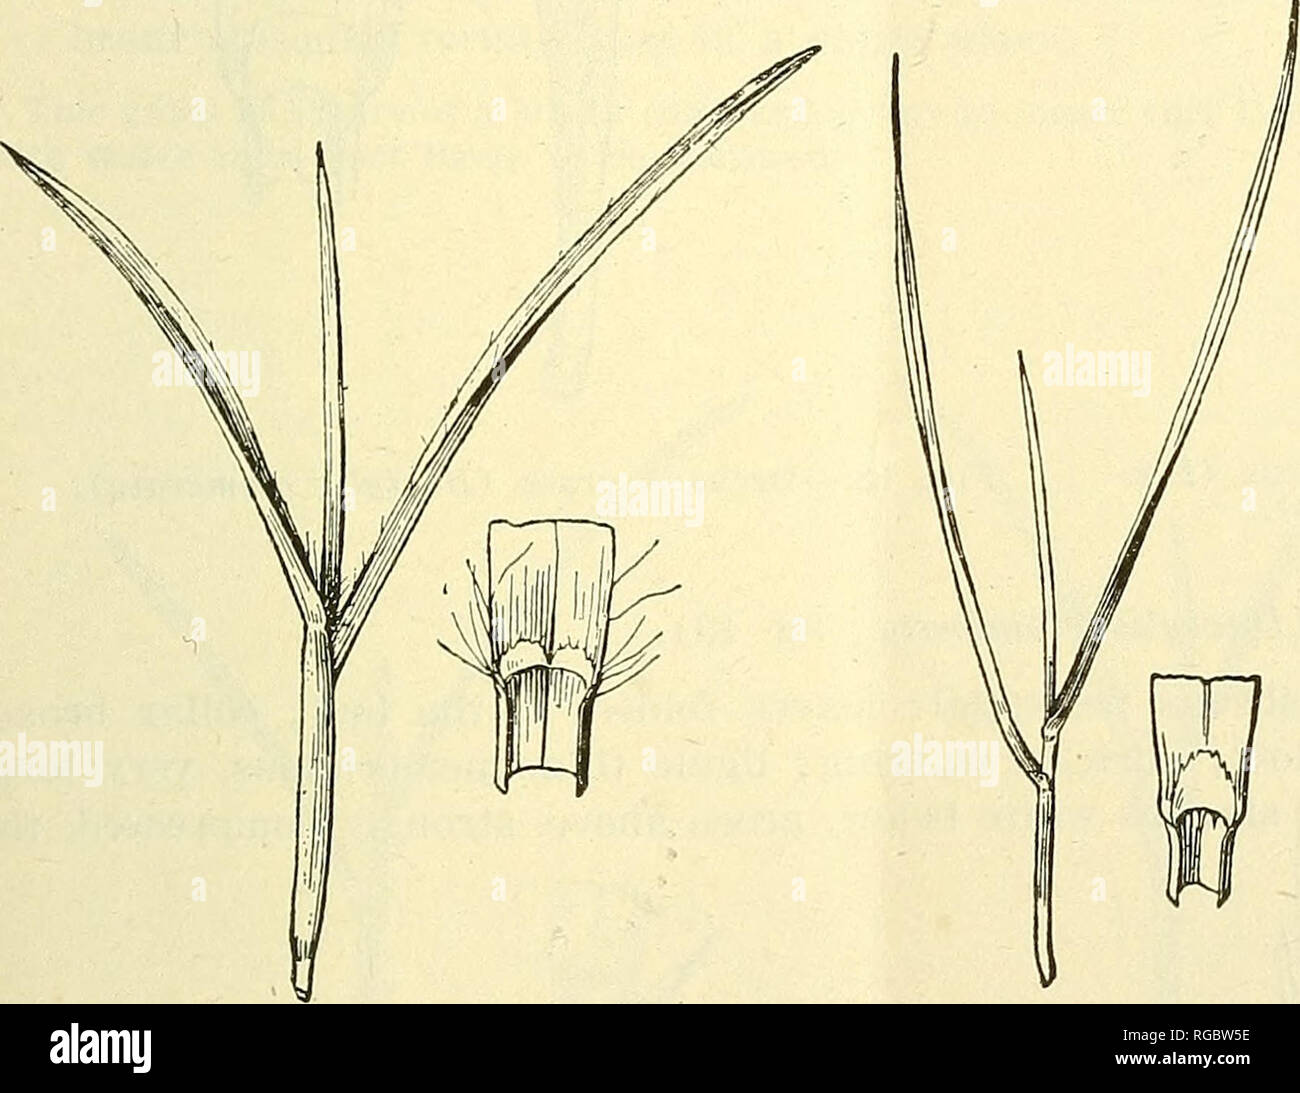 . Bulletin of the U.S. Department of Agriculture. Agriculture; Agriculture. IDENTIFICATION OF GEASSES. 11 5. Yard-grass (Eleusine indica; fig. 9). A tufted annual, decumbent at base; leaves folded in the bud; collar broad, continuous, hairy; auricles none; ligule membranous, medium long, coarsely toothed; sheaths white near the ground, green above, strongly compressed, sparsely hairy along the margins; blades V-shaped in cross section, about one-fourth inch wide, sparsely hairy above, tough in texture, linear, obtuse pointed. This is a common summer grass, making conspicuous tufts in lawns. 6. Stock Photo